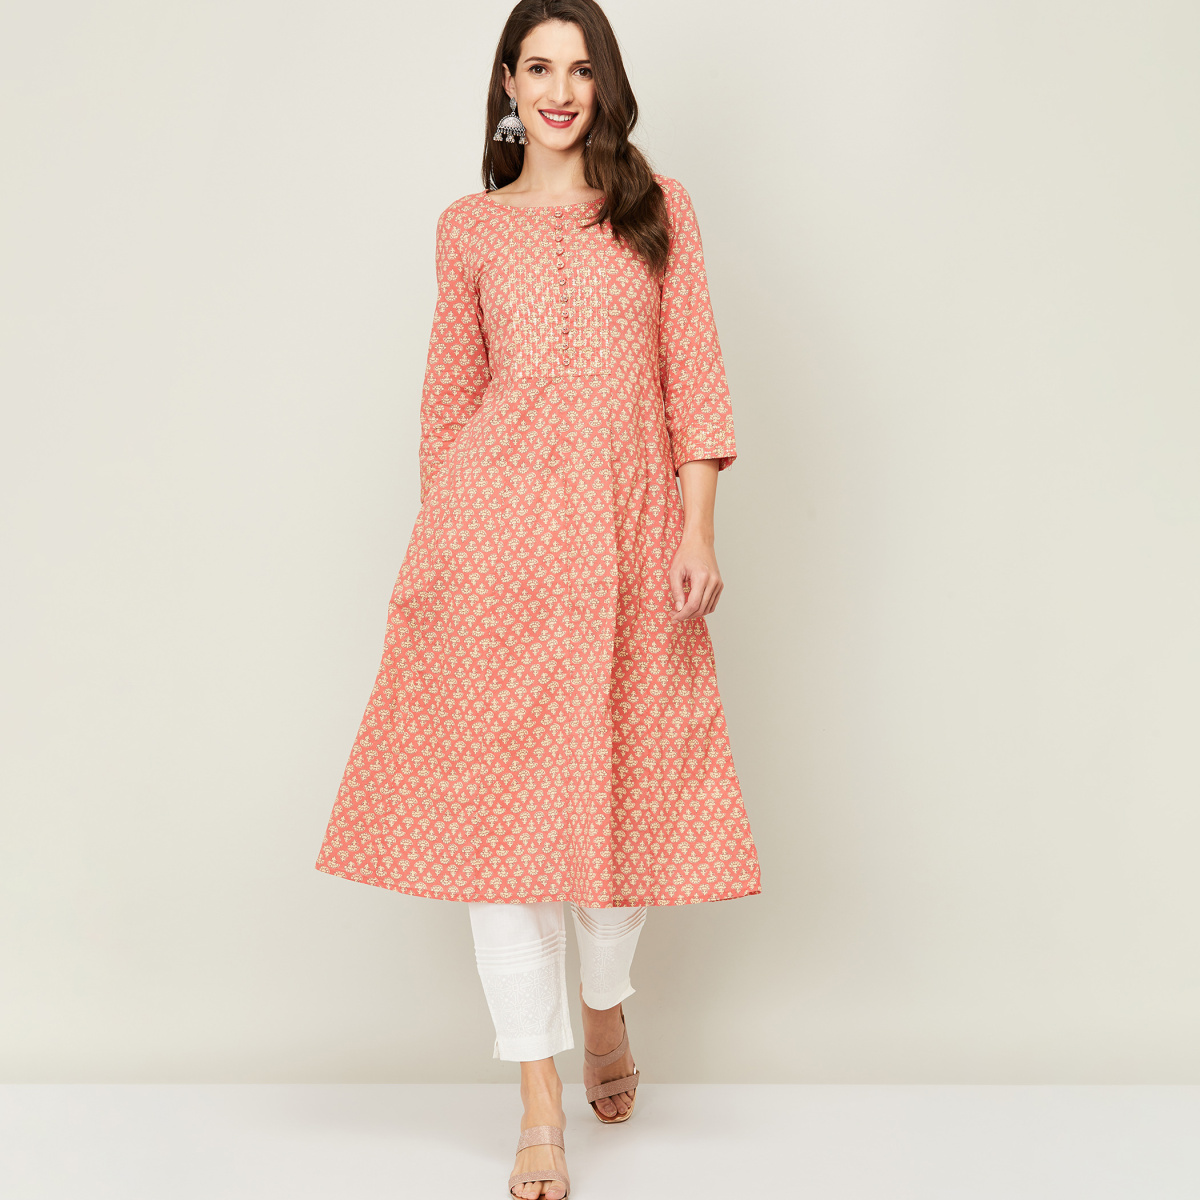 Buy latest Womens Kurtas  Kurtis from Melange By Lifestyle online in  India  Top Collection at LooksGudin  Looksgudin